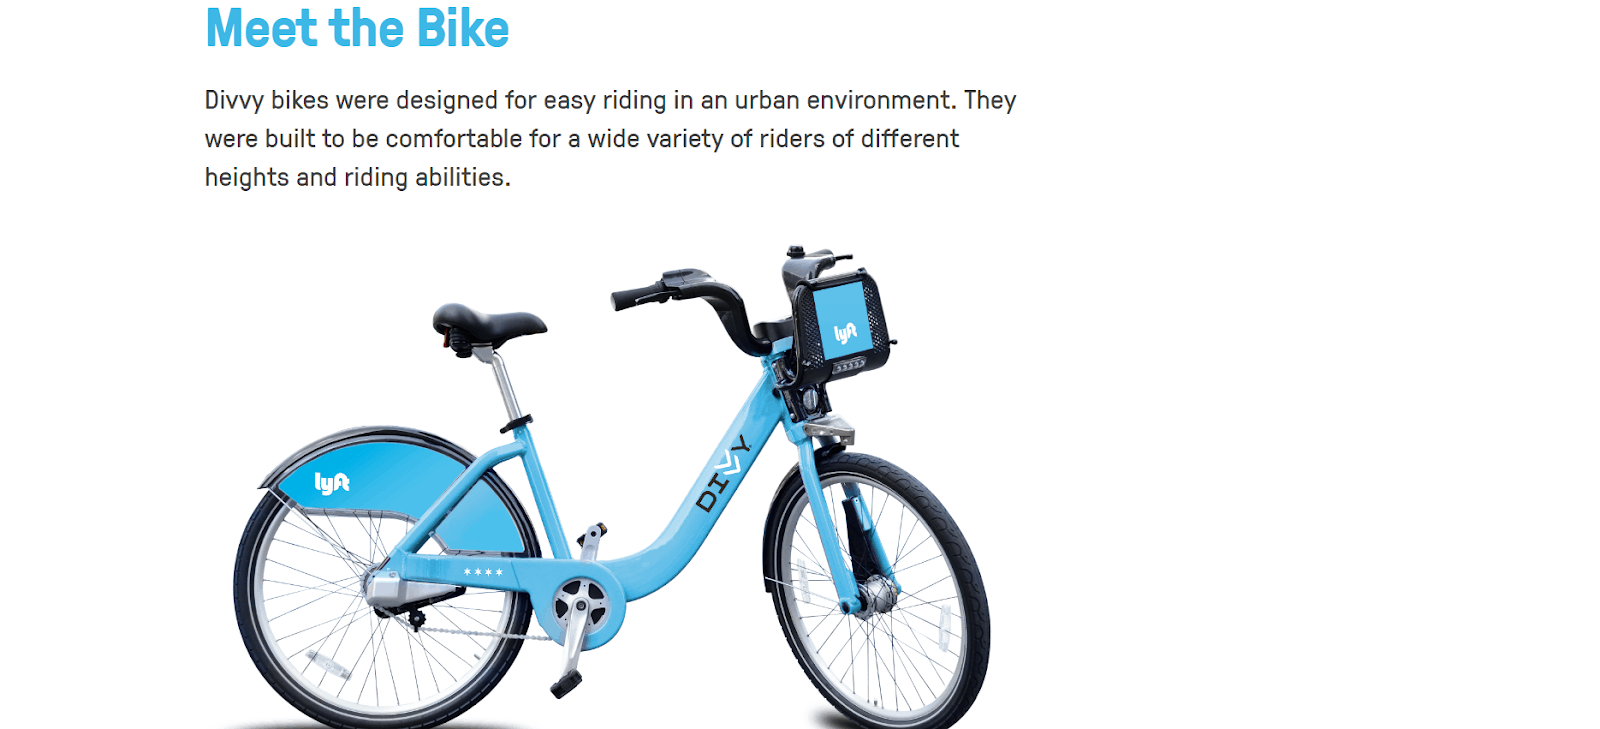 The "Meet the Bike" webpage on the Divvy Bikes site